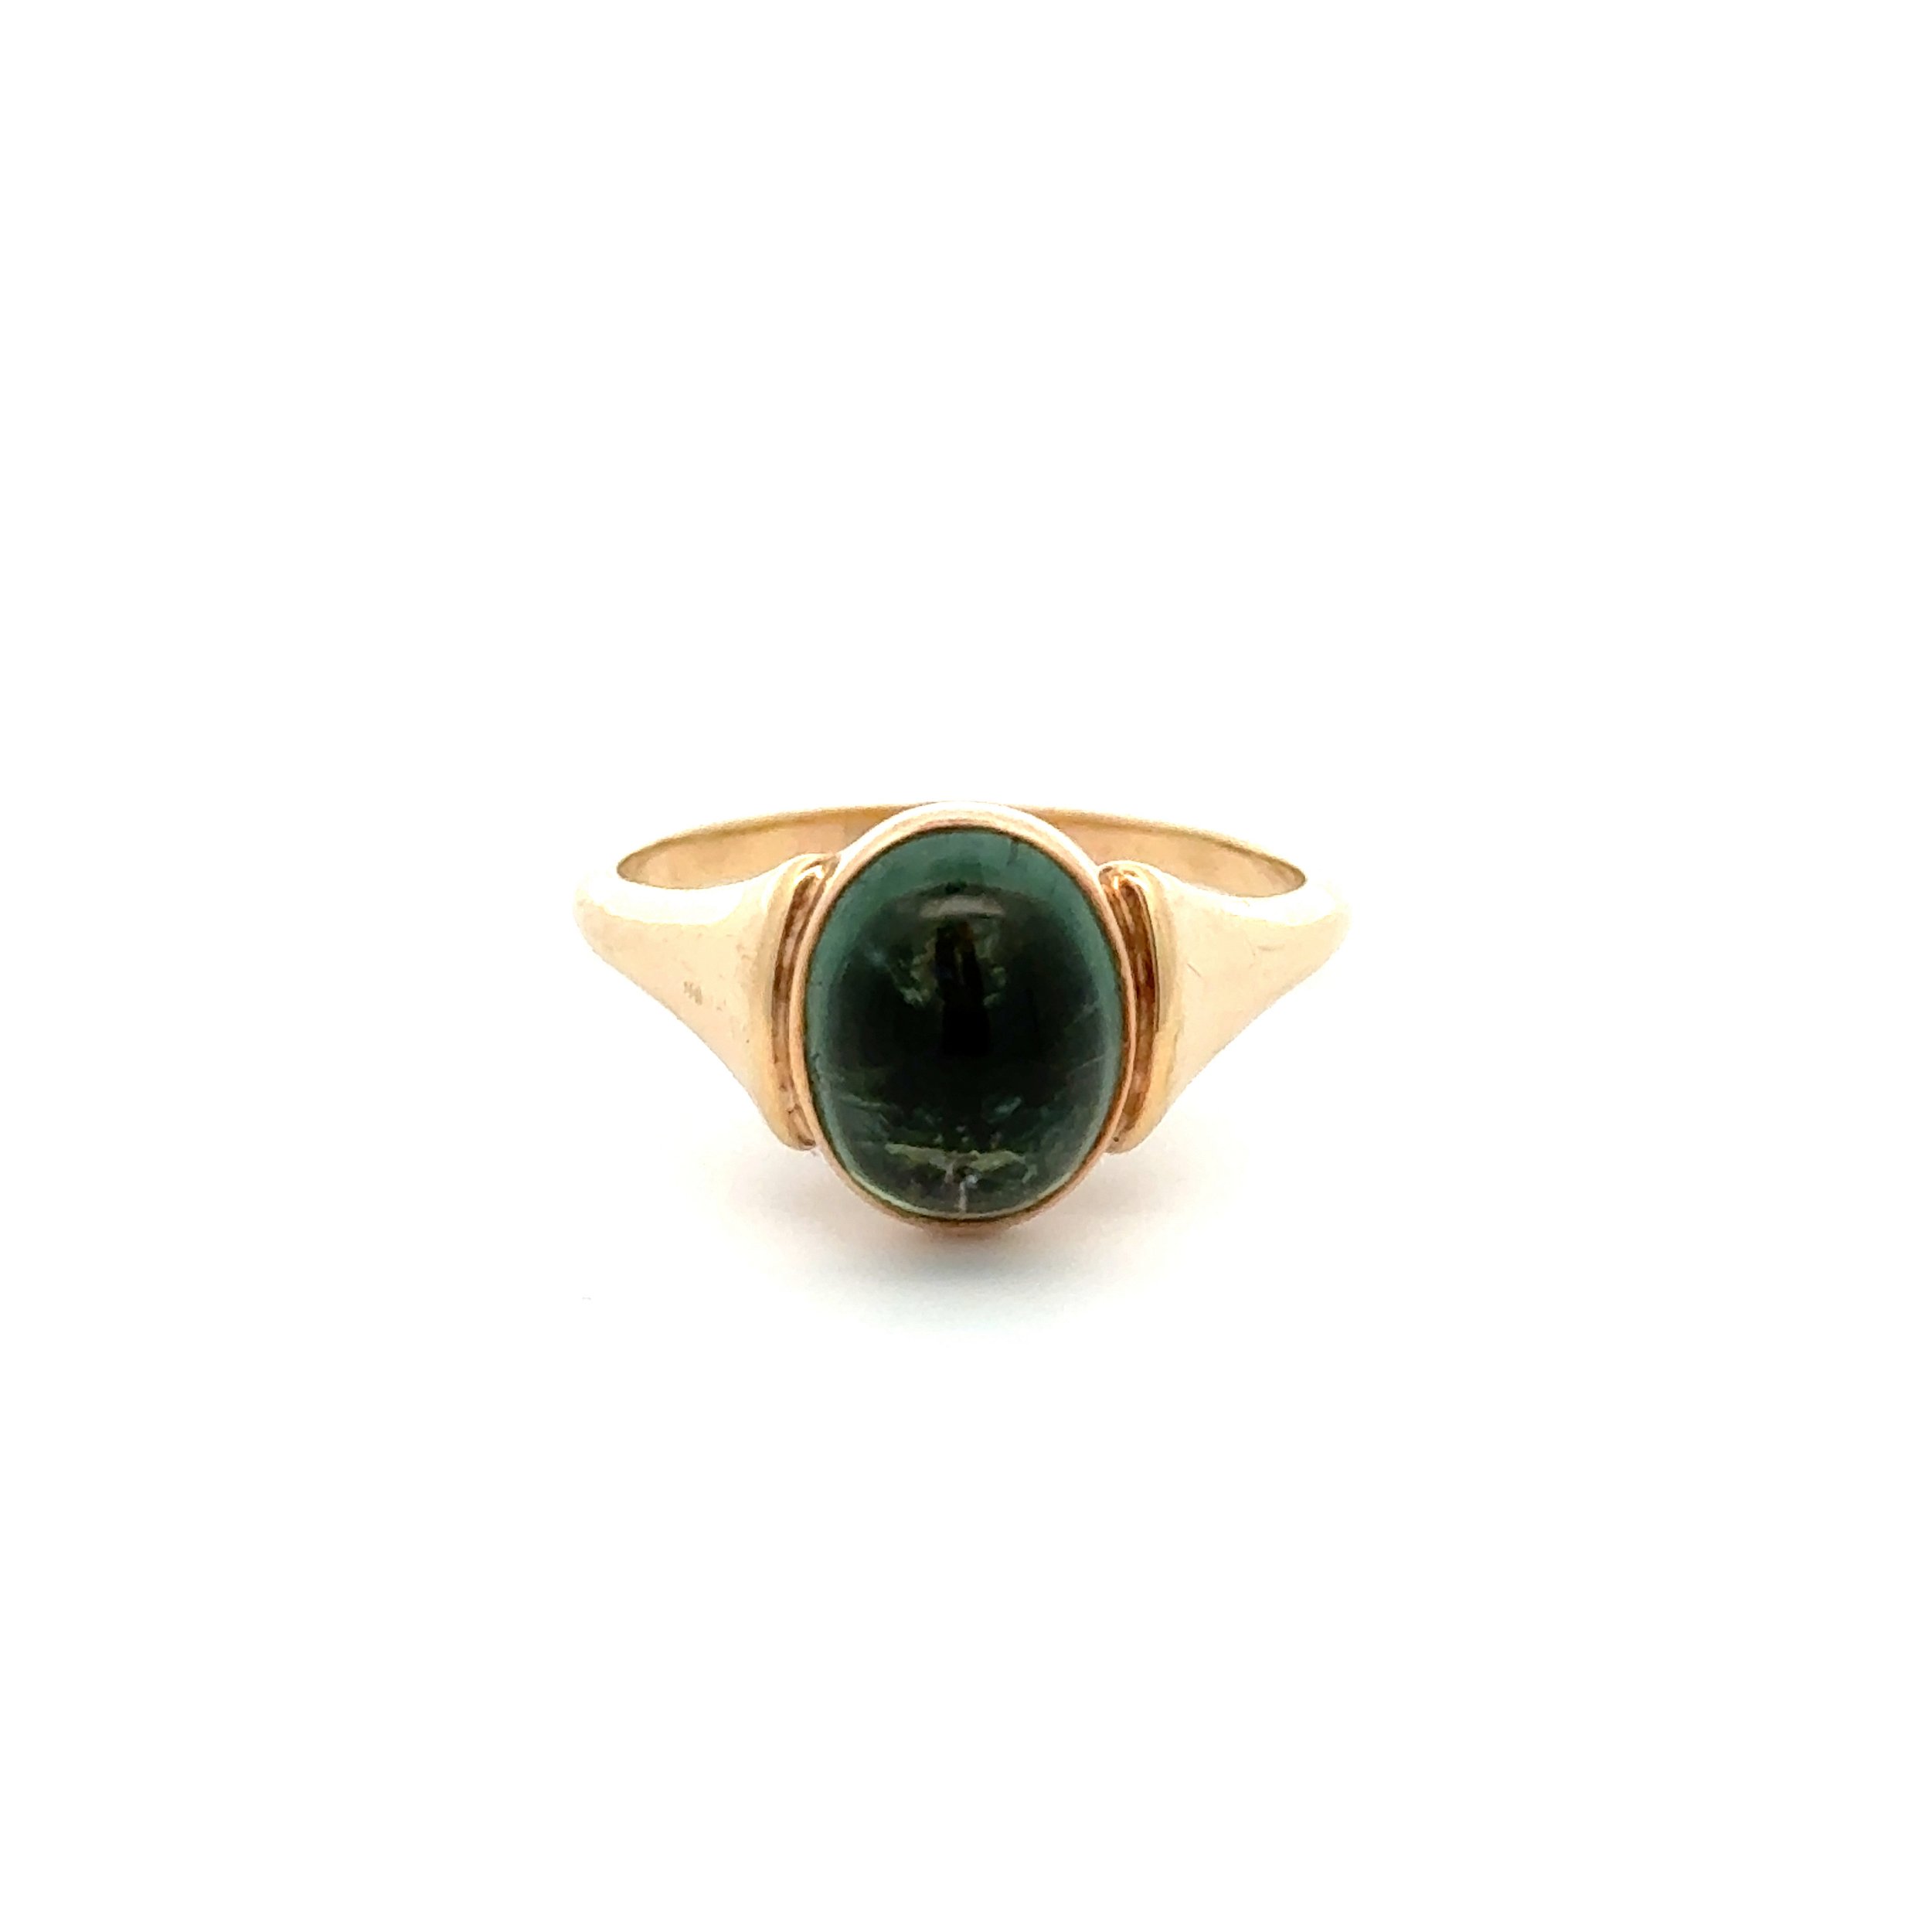 14K YG Cabochon Green Tourmaline Solitaire Tapered Shank Ring 6.2g, s9.5